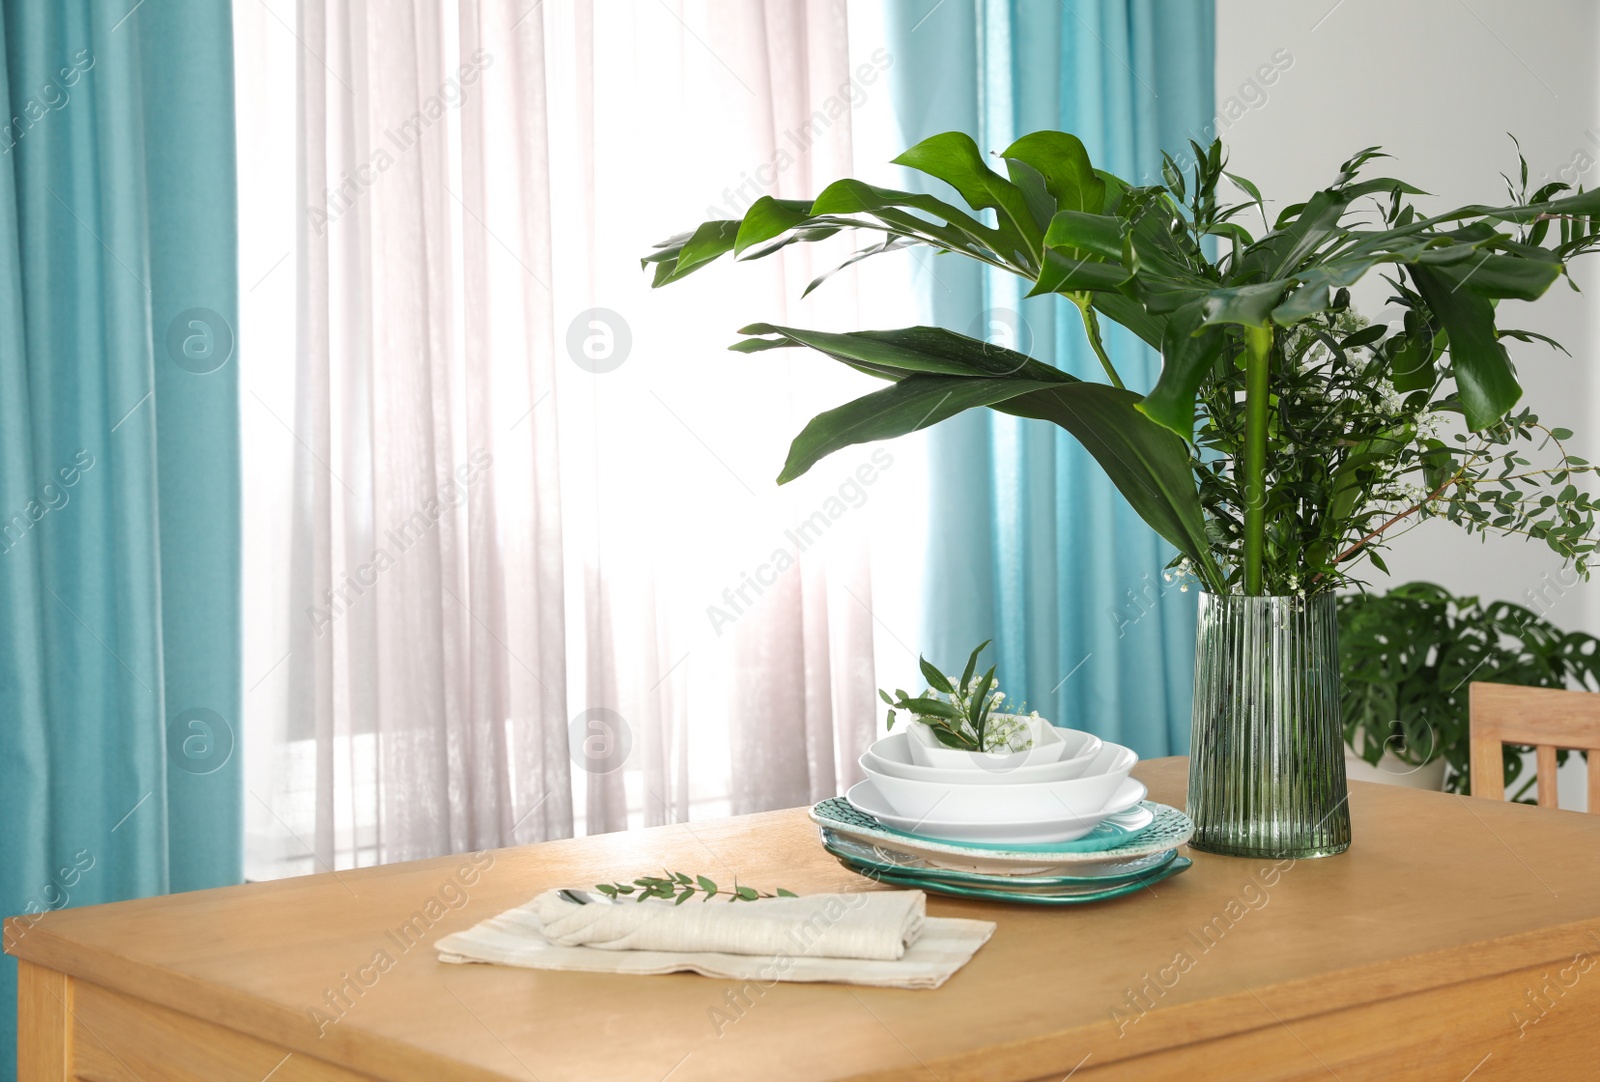 Photo of Dishware and plants on wooden table near window with elegant curtains